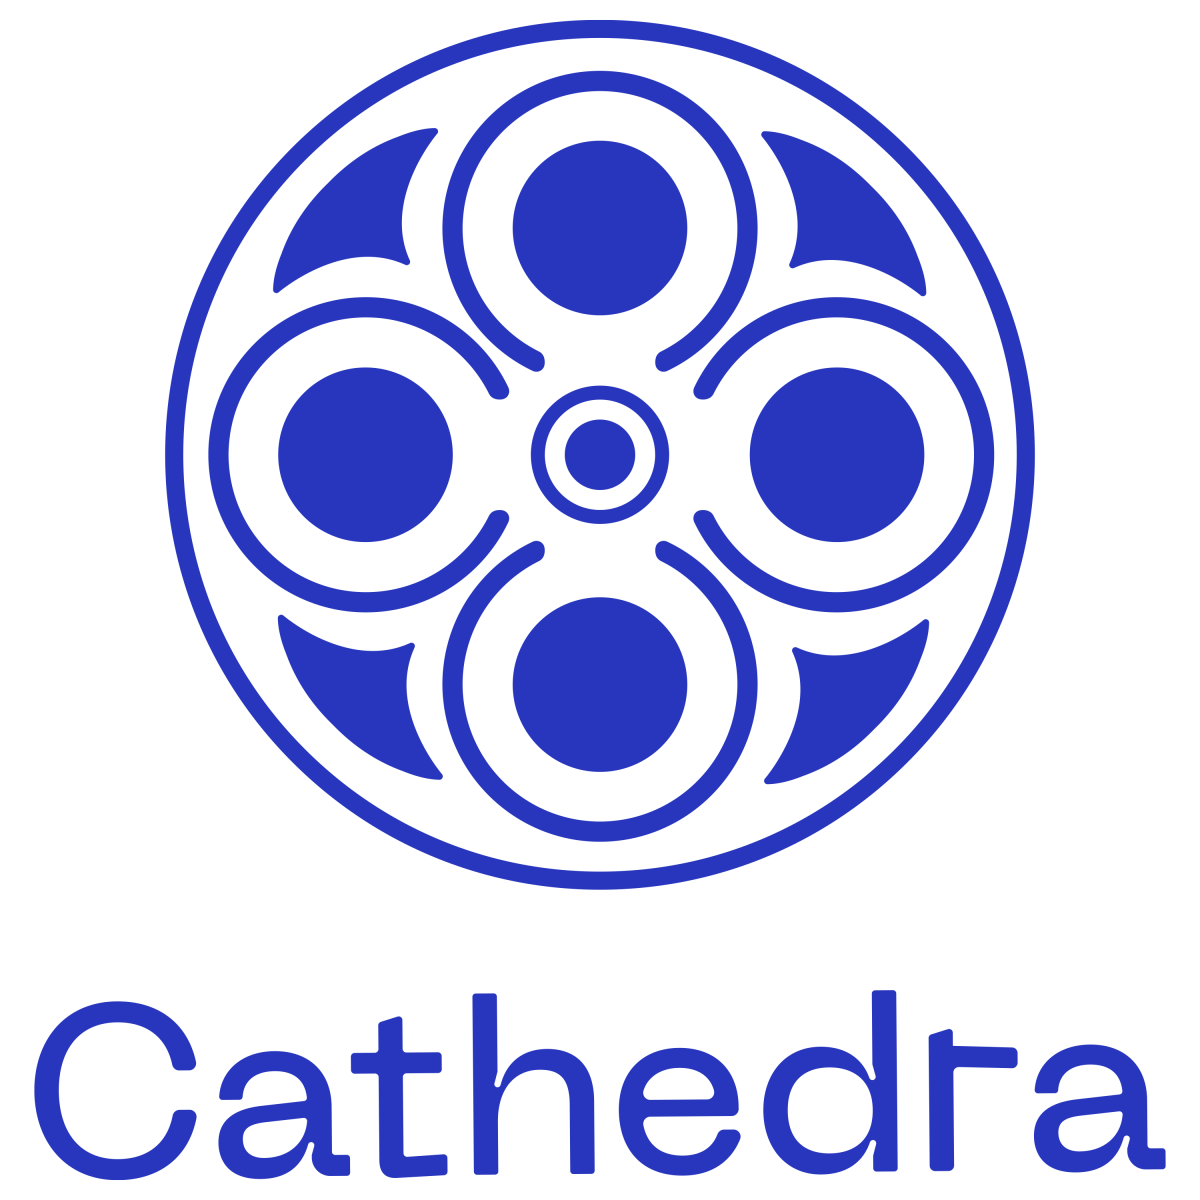 BTC Miner Fortress Technologies Rebrands To Cathedra Bitcoin Inc